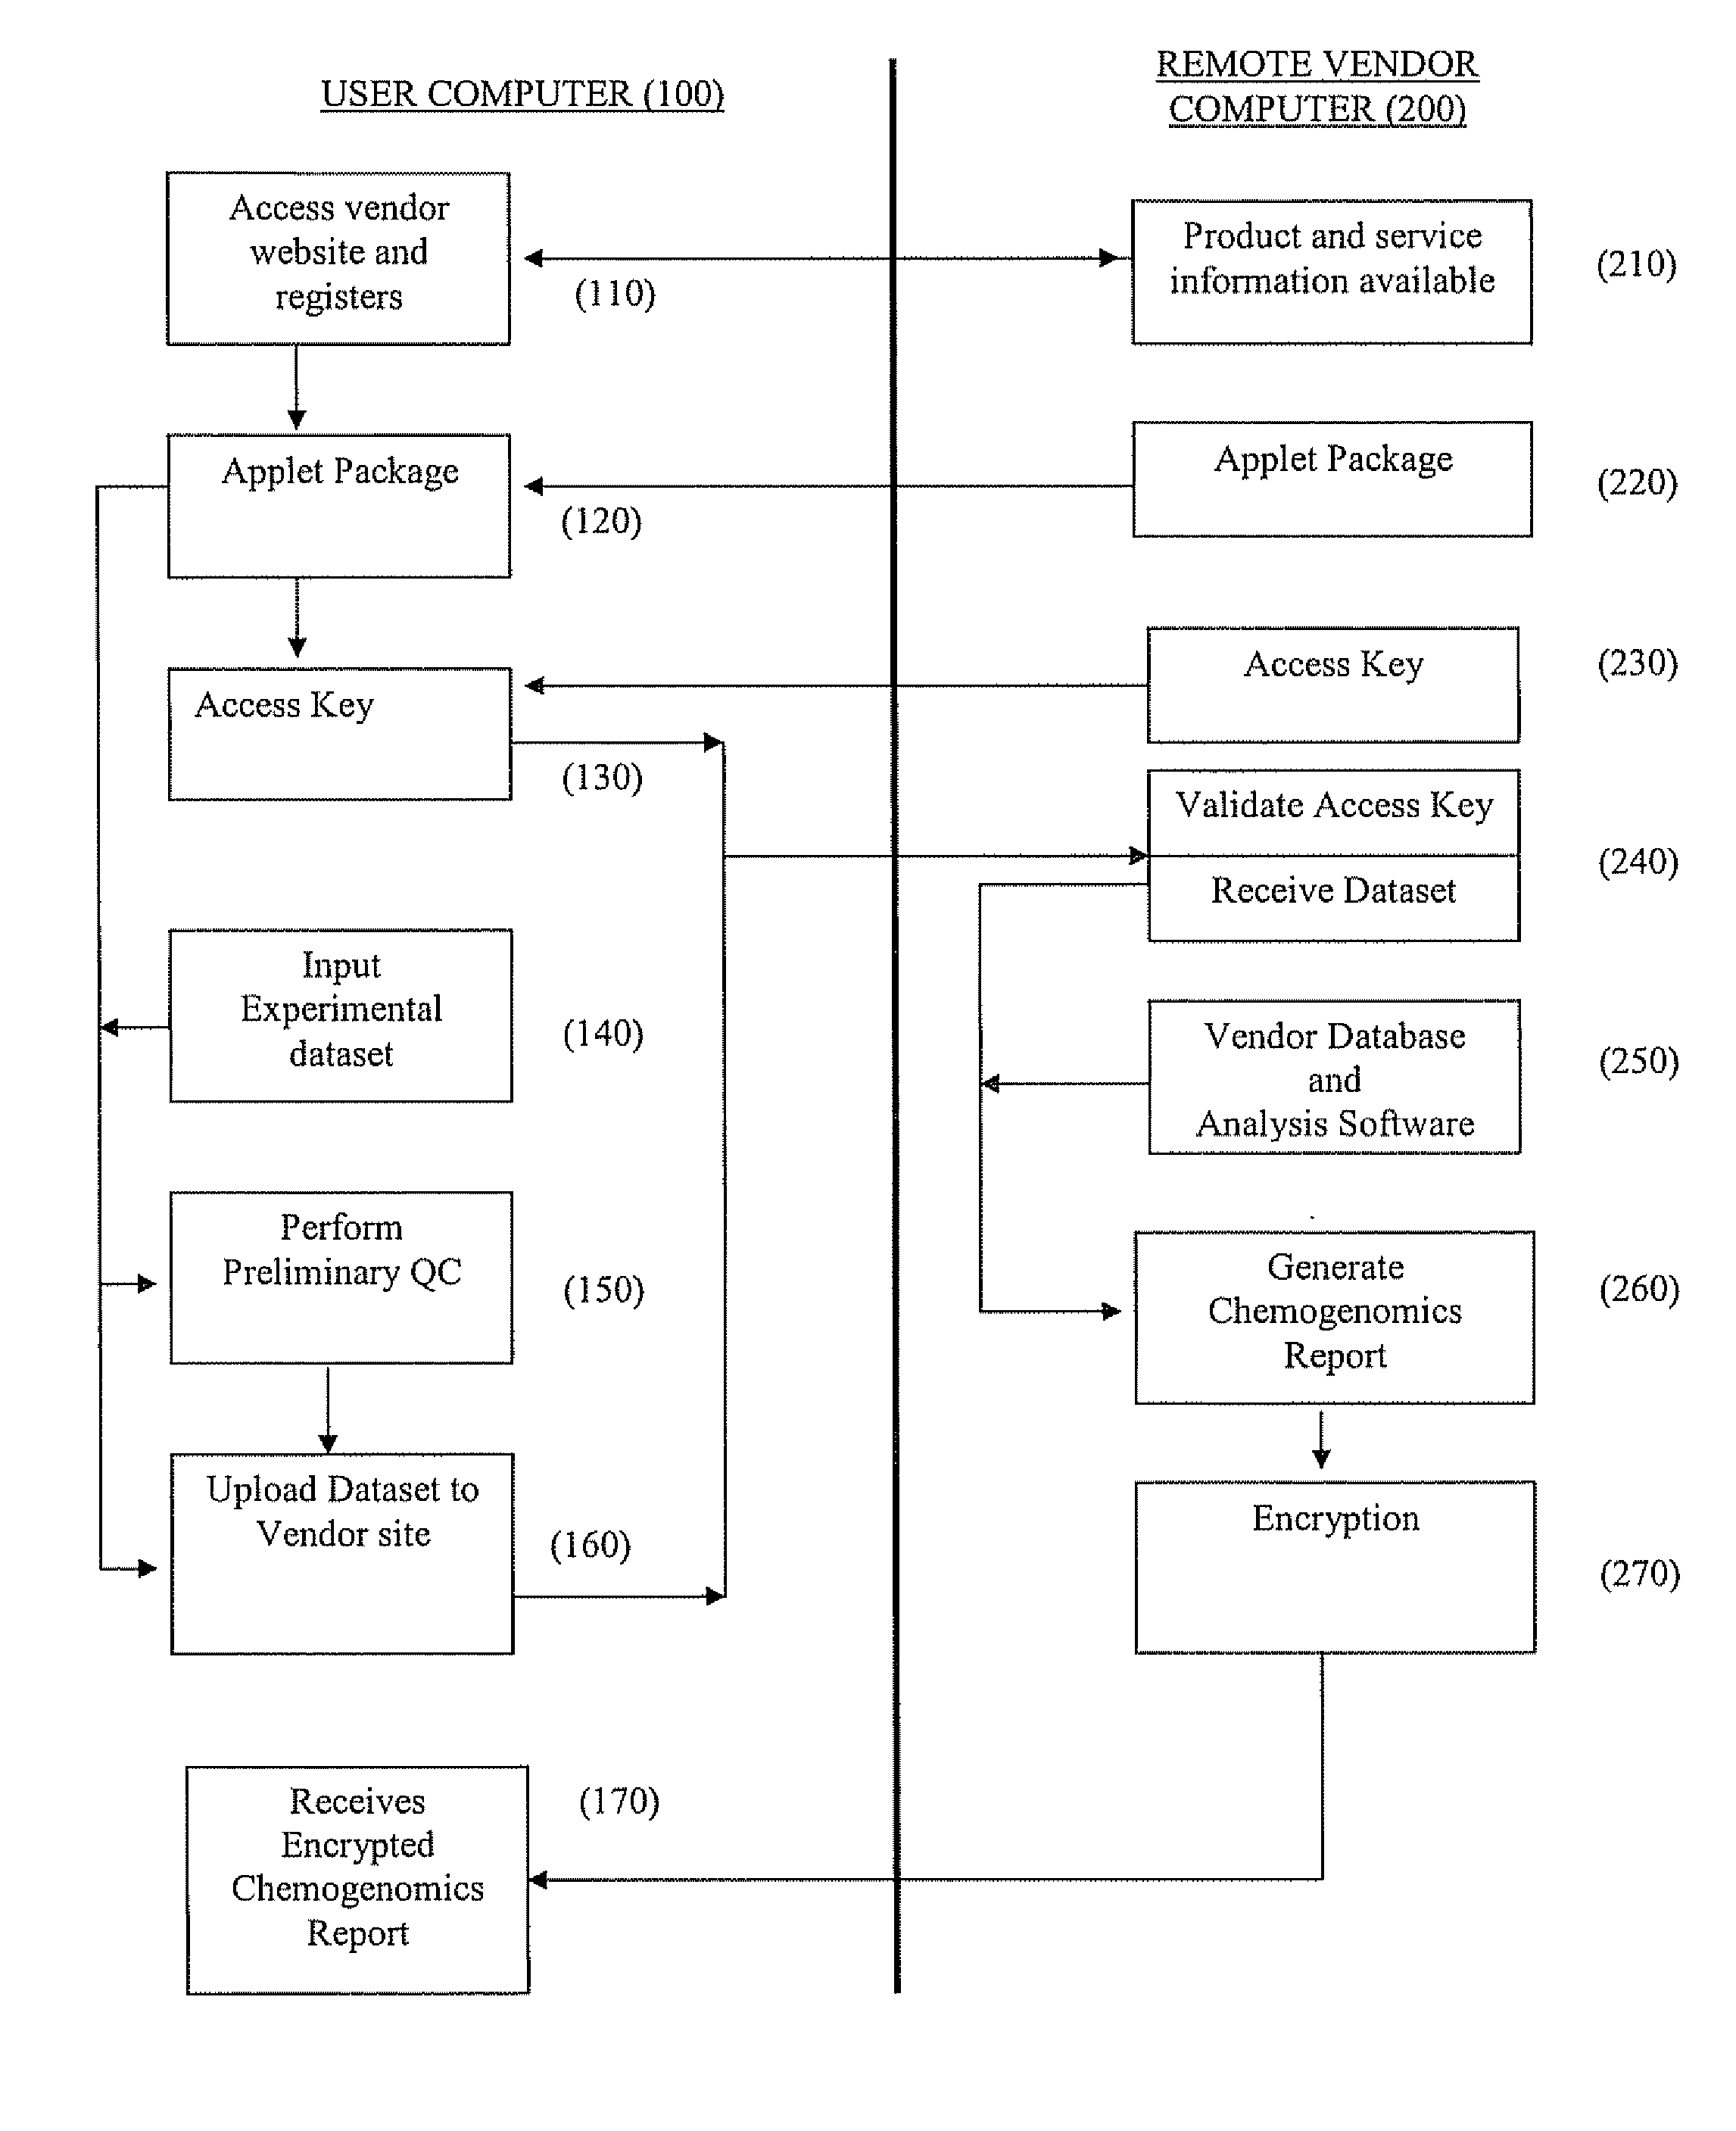 Systems and methods for remote computer-based analysis of user-provided chemogenomic data